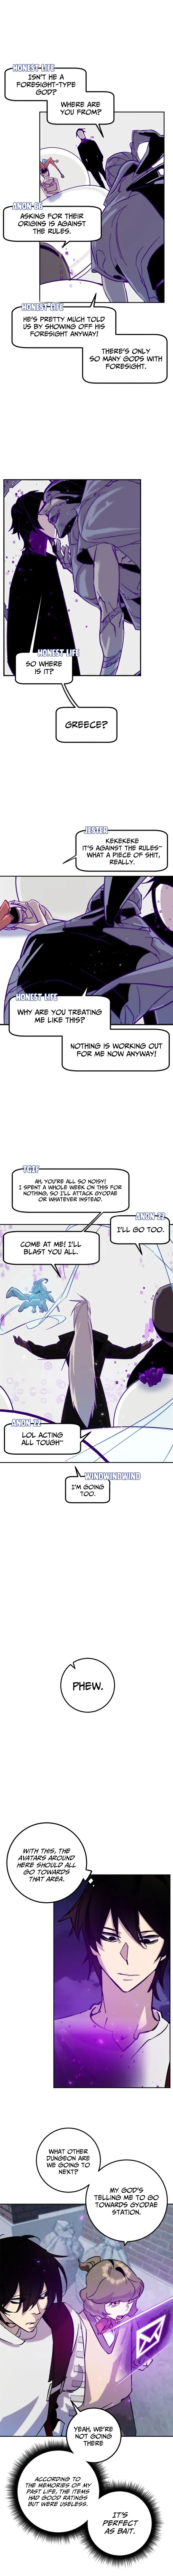 Return to Player Chapter 24 page 7